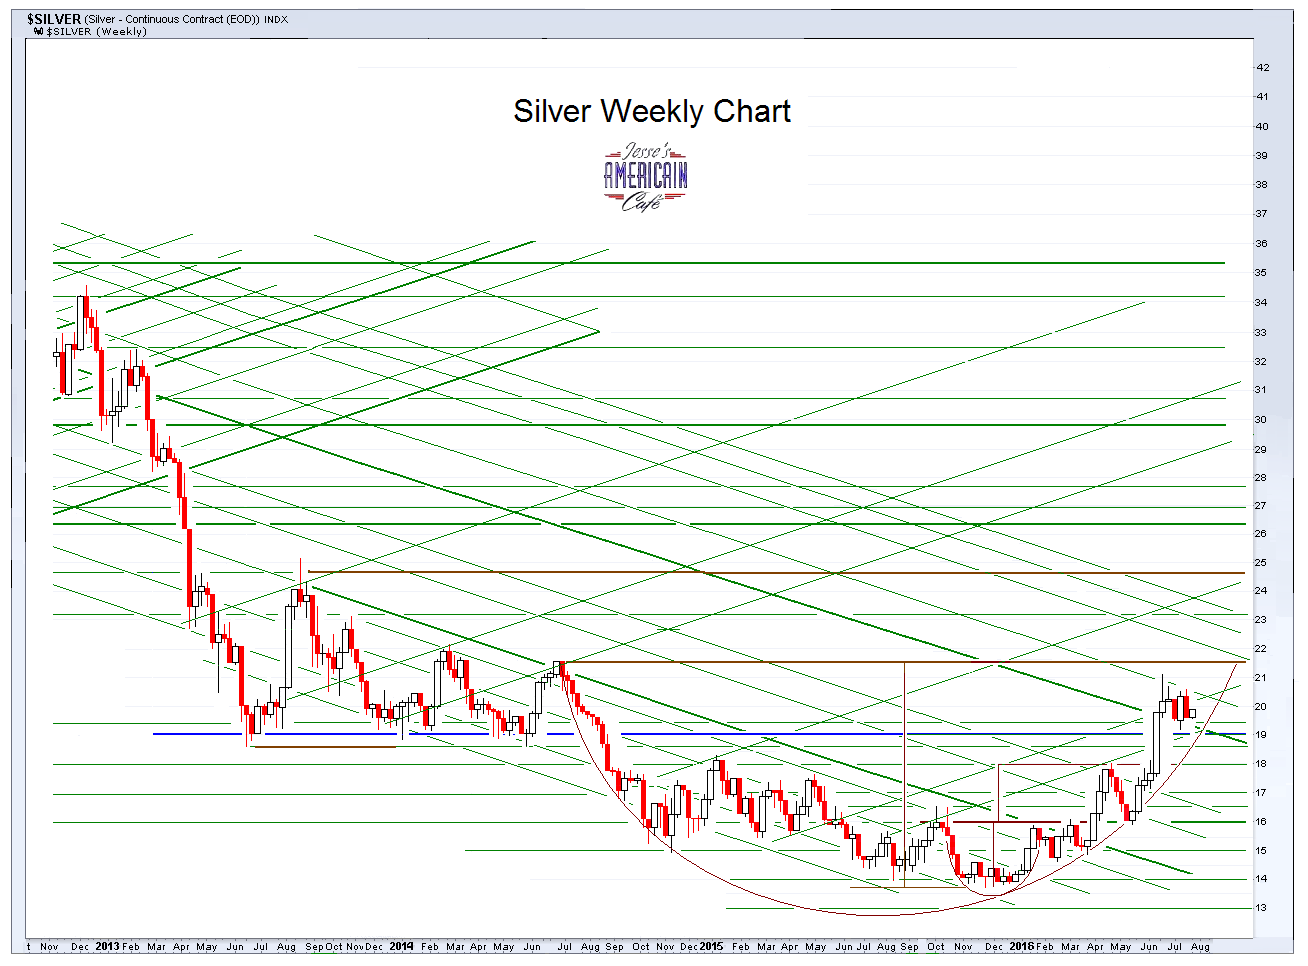 Jesse's Café Américain: Gold Daily and Silver Weekly Charts - Dollar ...